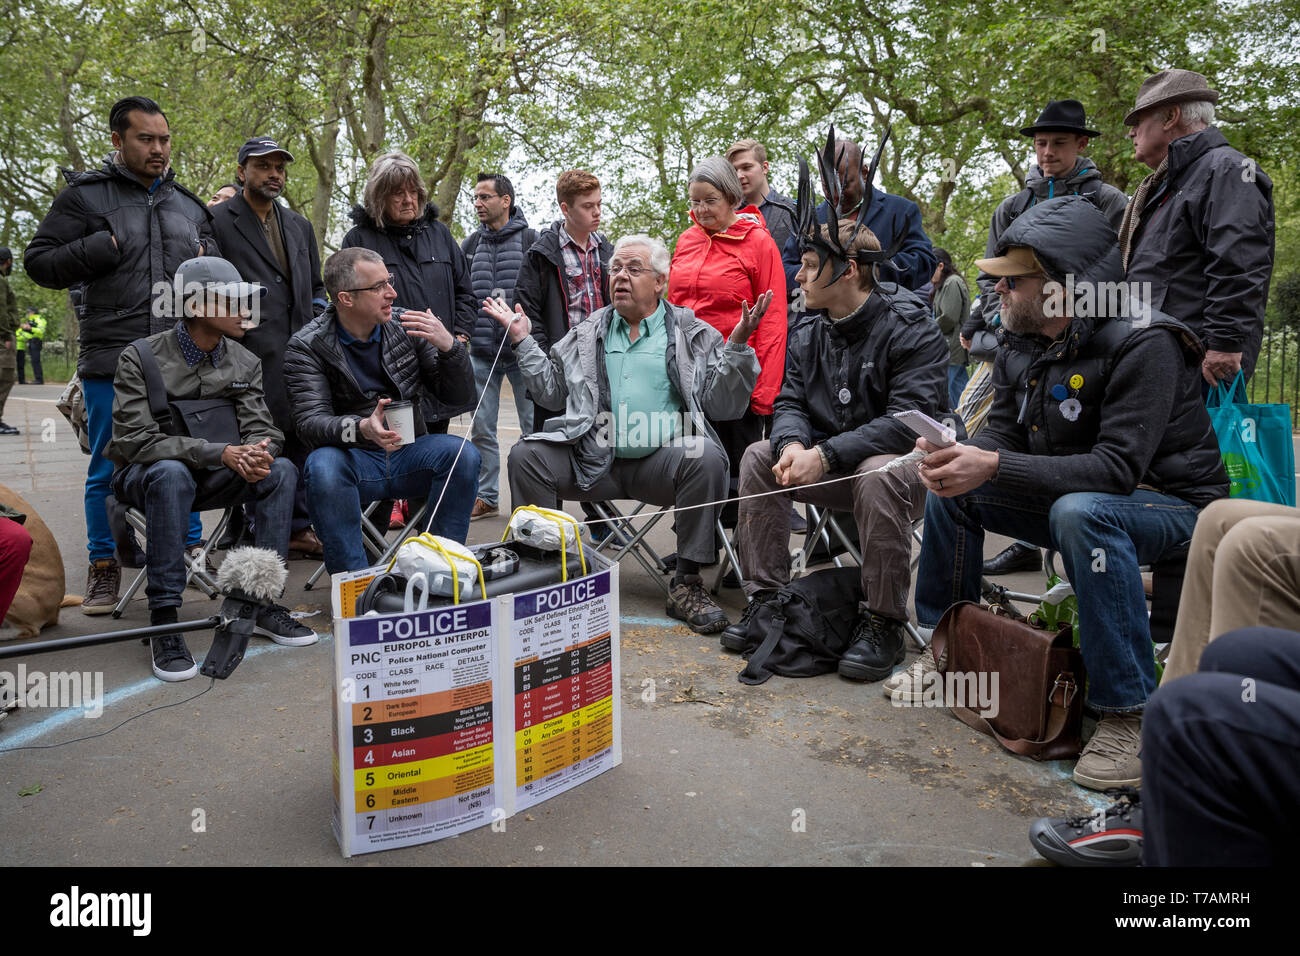 Religious, political preaching and debates continue at Speakers' Corner, the public speaking area of Hyde Park in London, UK. Stock Photo